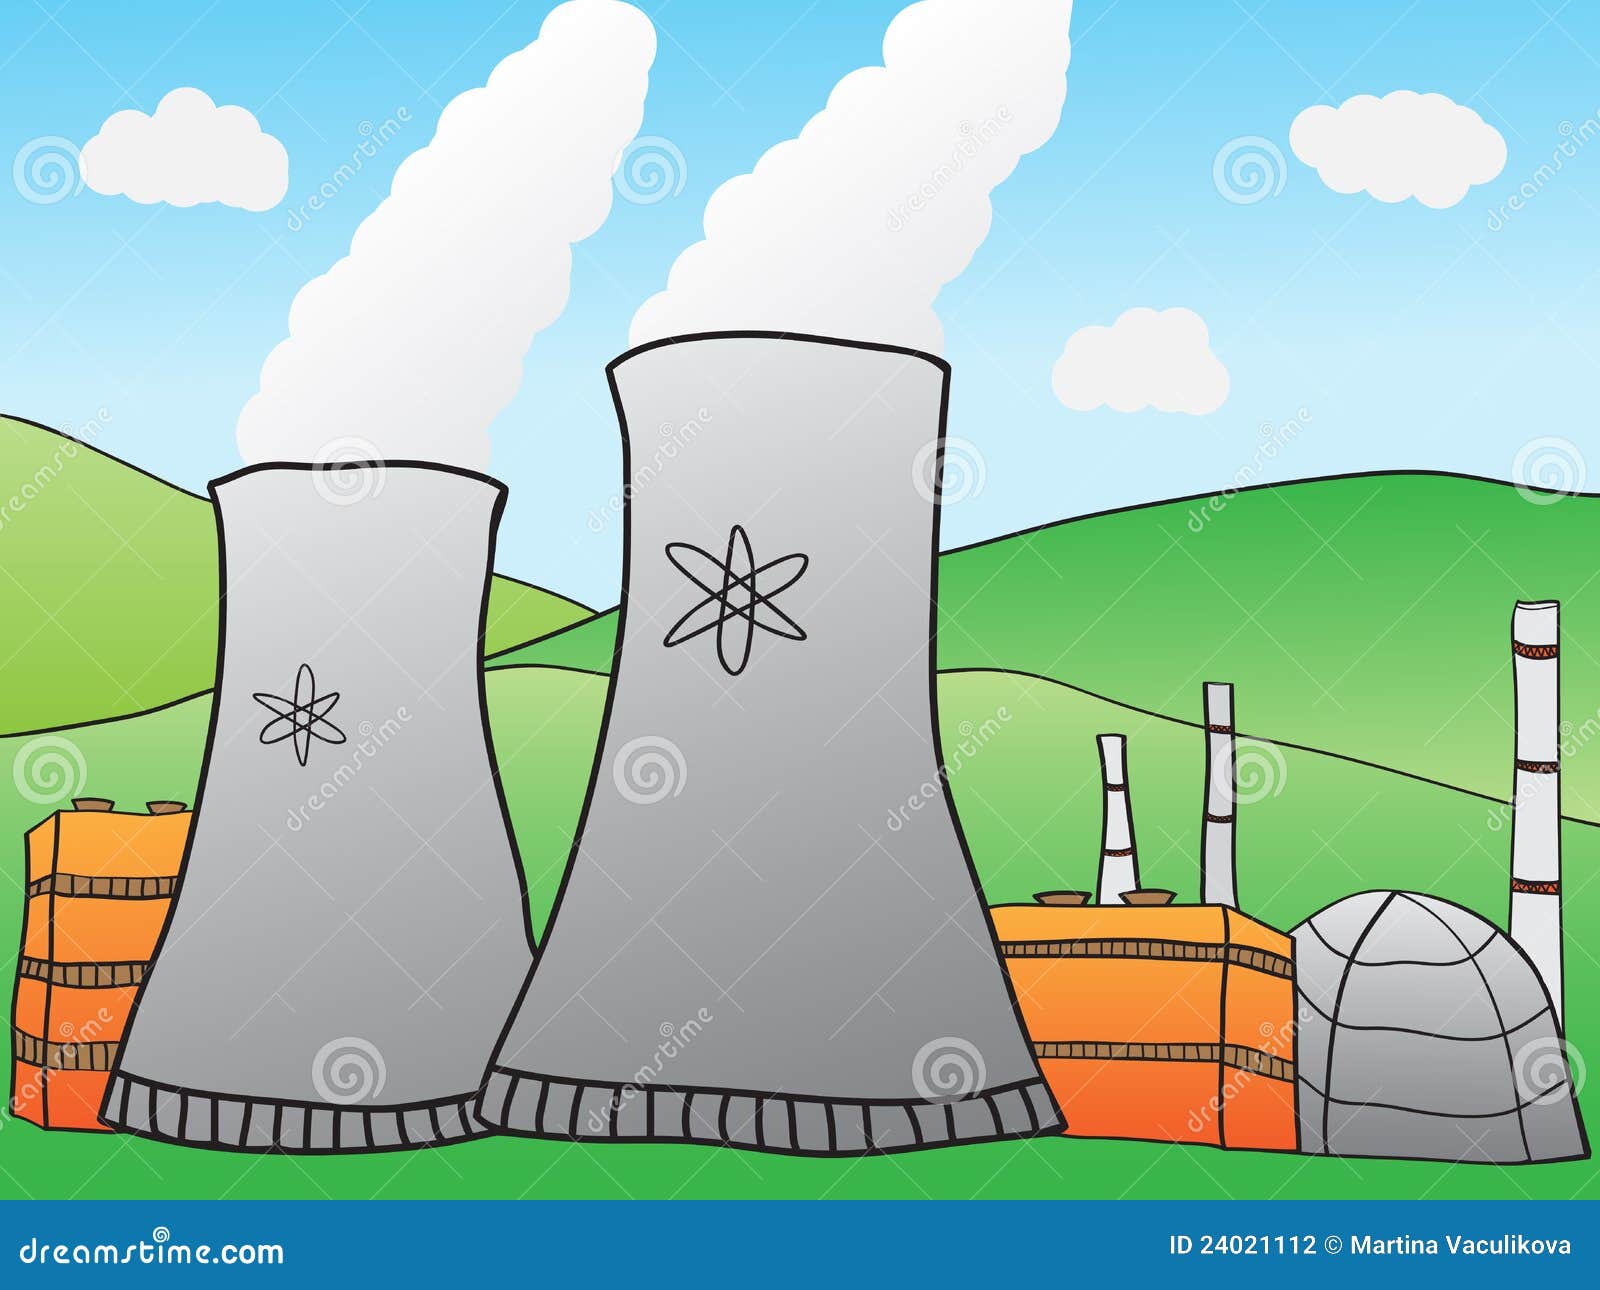 clipart of nuclear power plant - photo #13